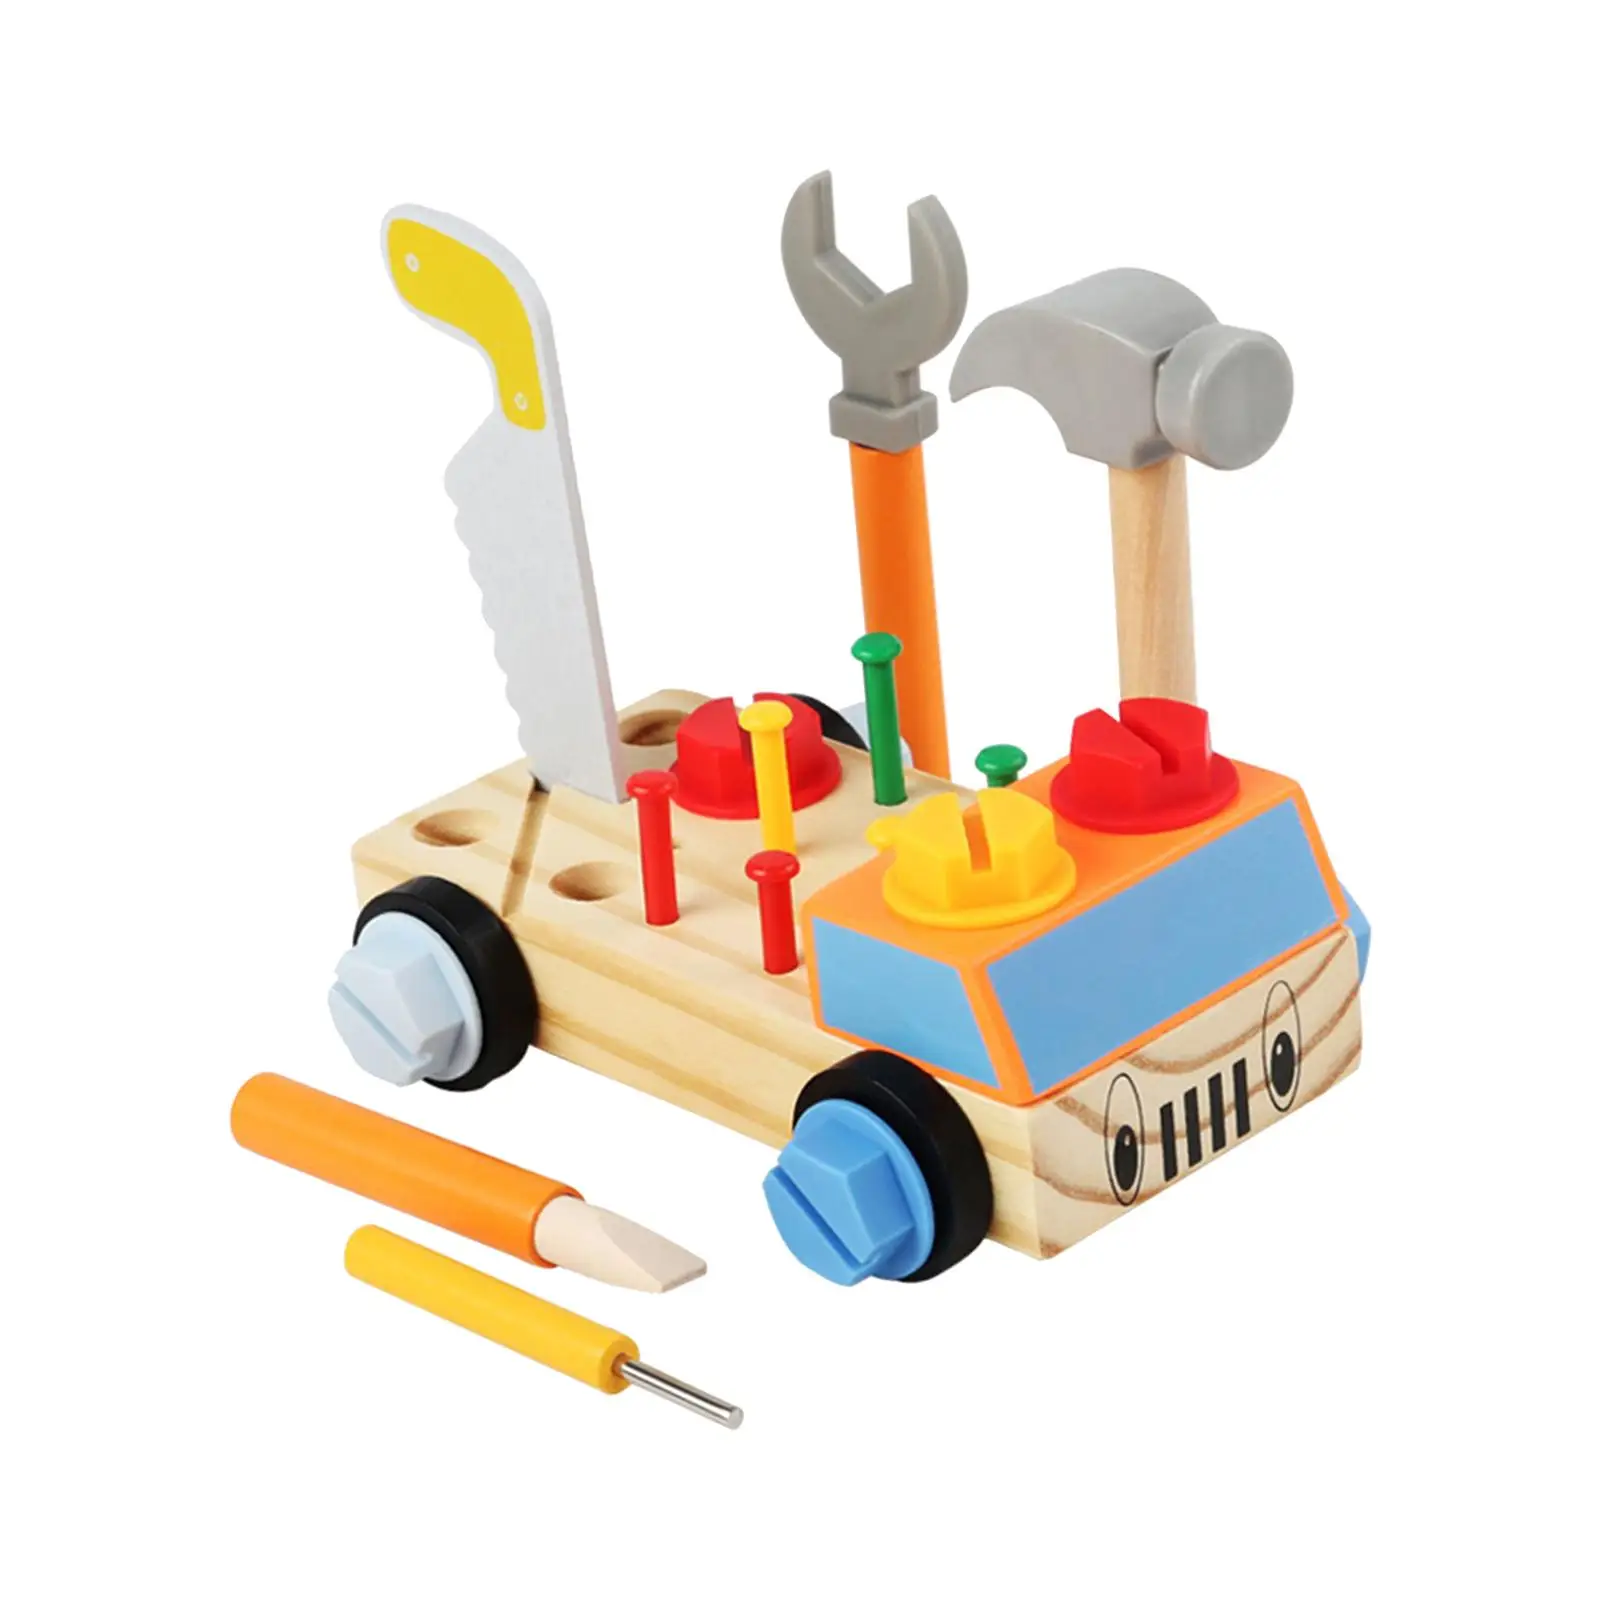 Children`s Construction Tool Workbench Learning Activities for Toddler